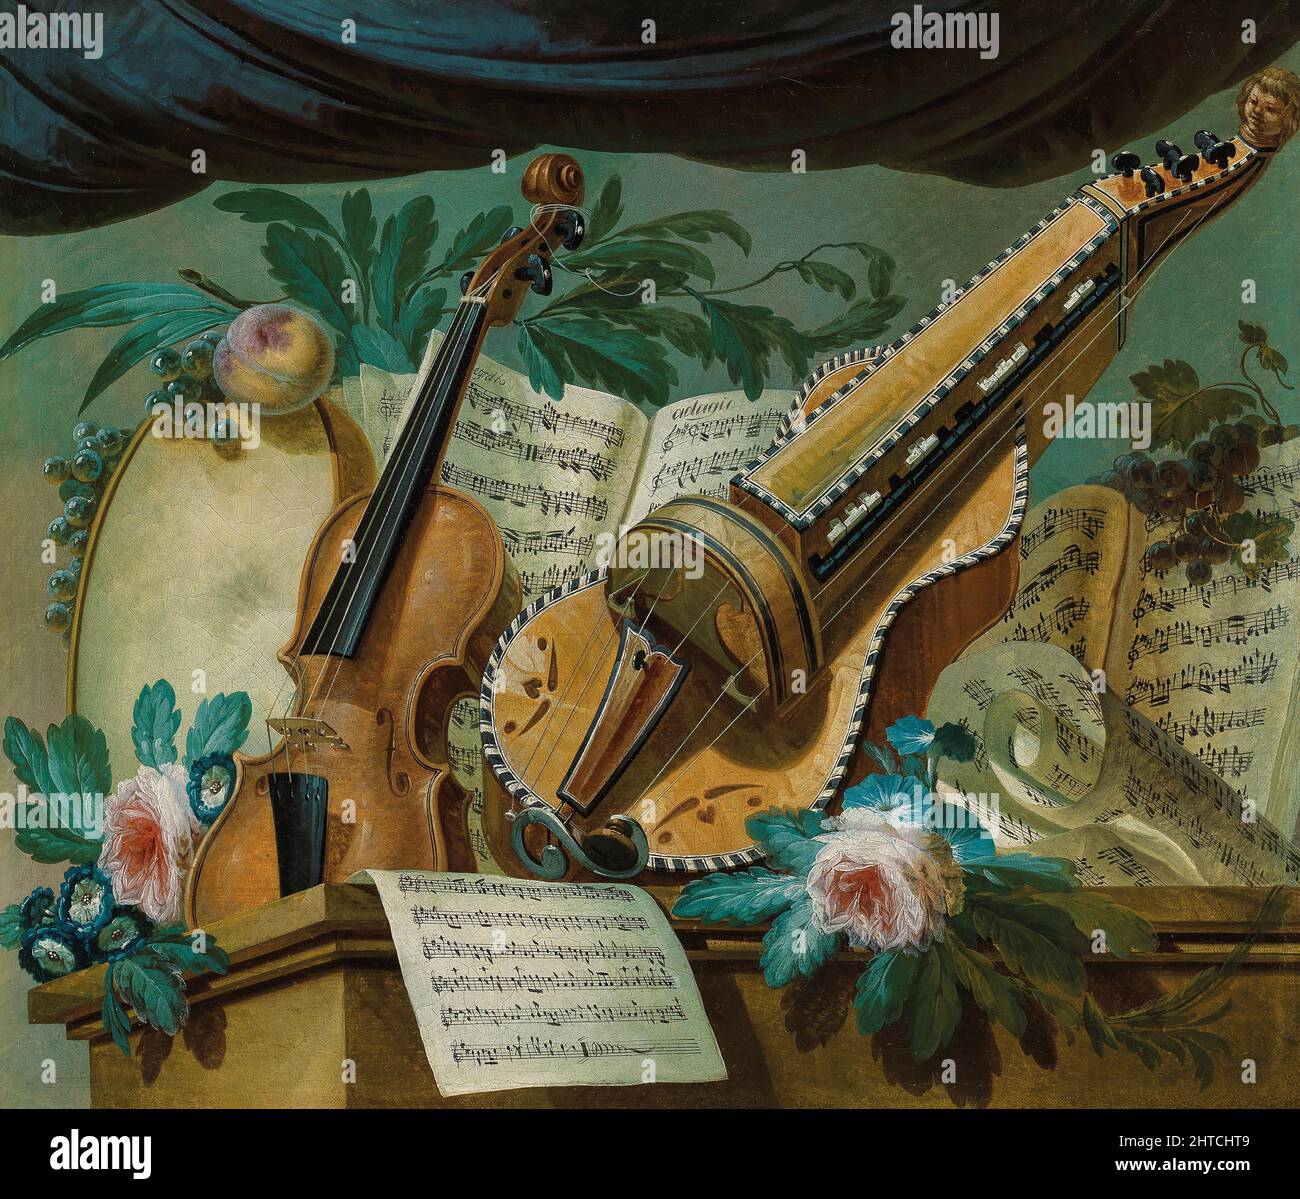 Allegory of music with a violin, a hurdy-gurdy, a framedrum, sheets of music, flowers and fruit on a stone plinth. Private Collection. Stock Photo